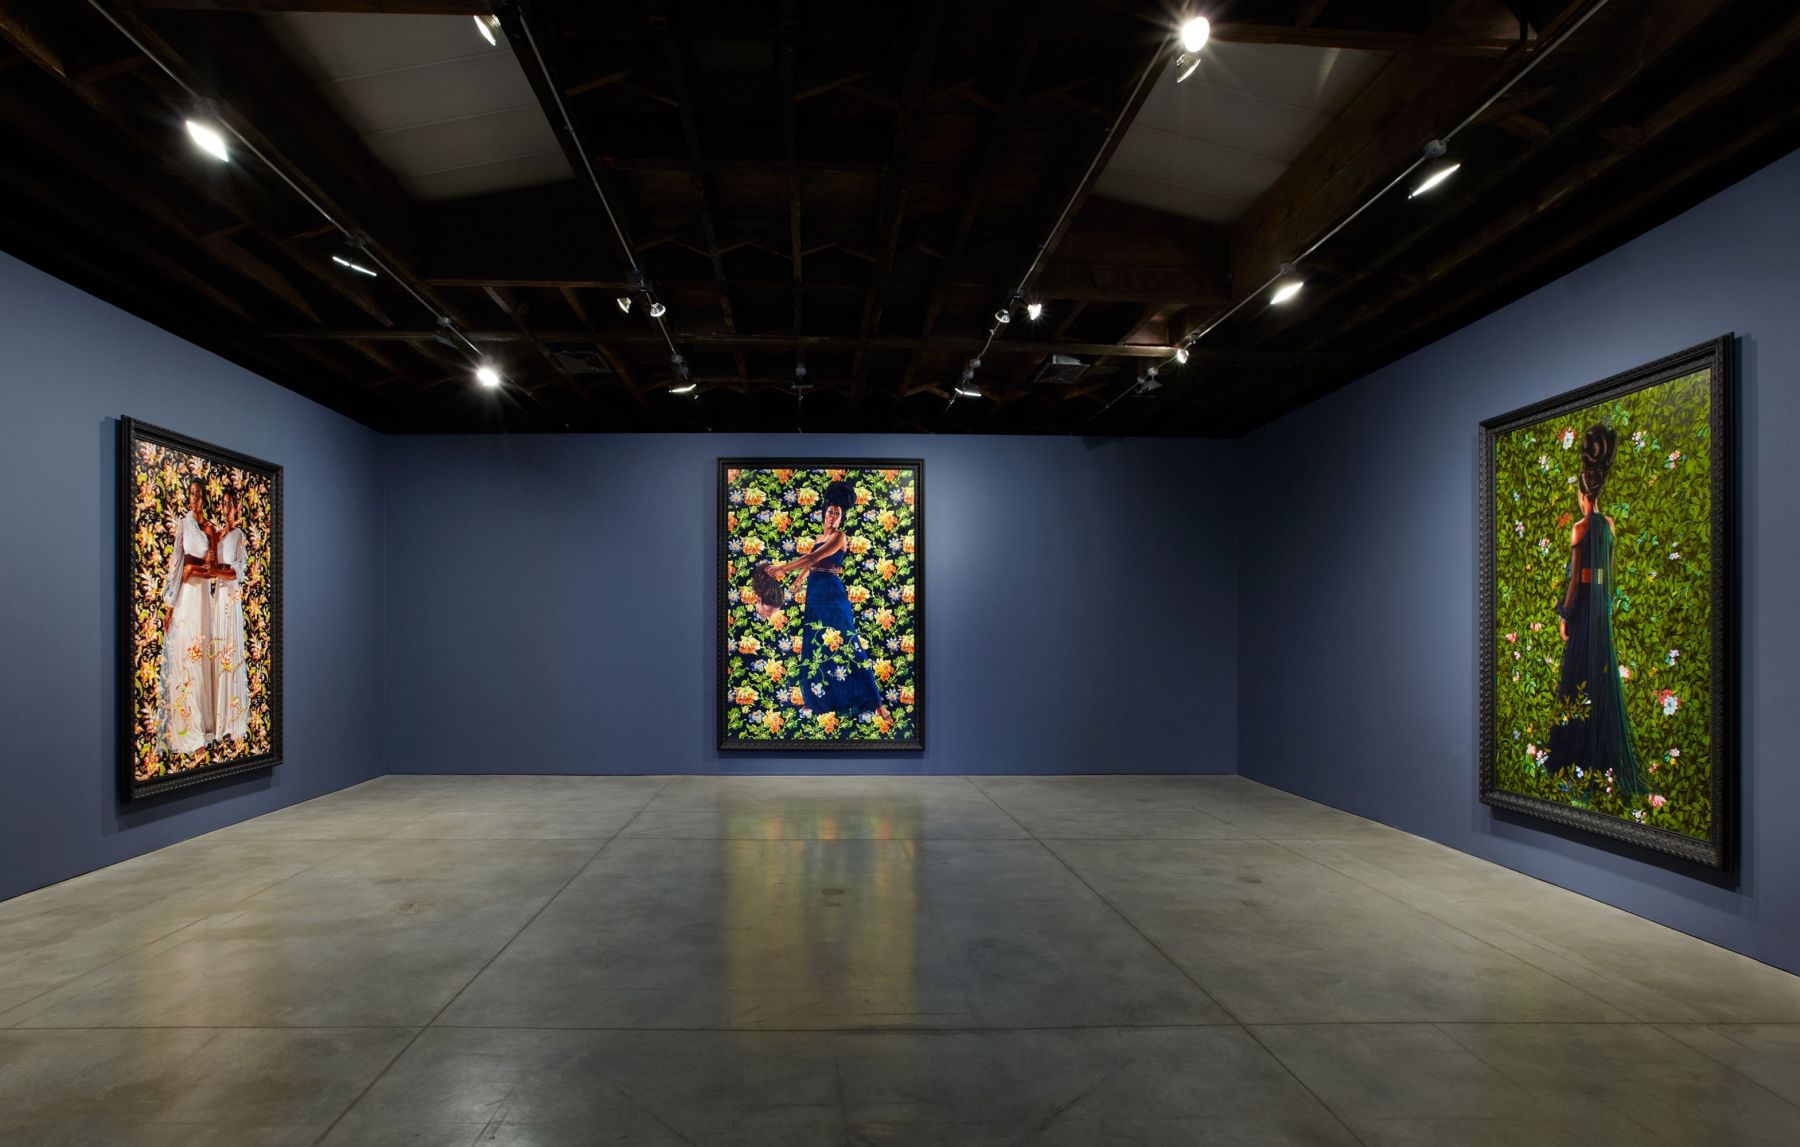 Kehinde Wiley | An Economy of Grace, Sean Kelly Gallery, New York City, USA, May 6 - June 16, 2012 | 4